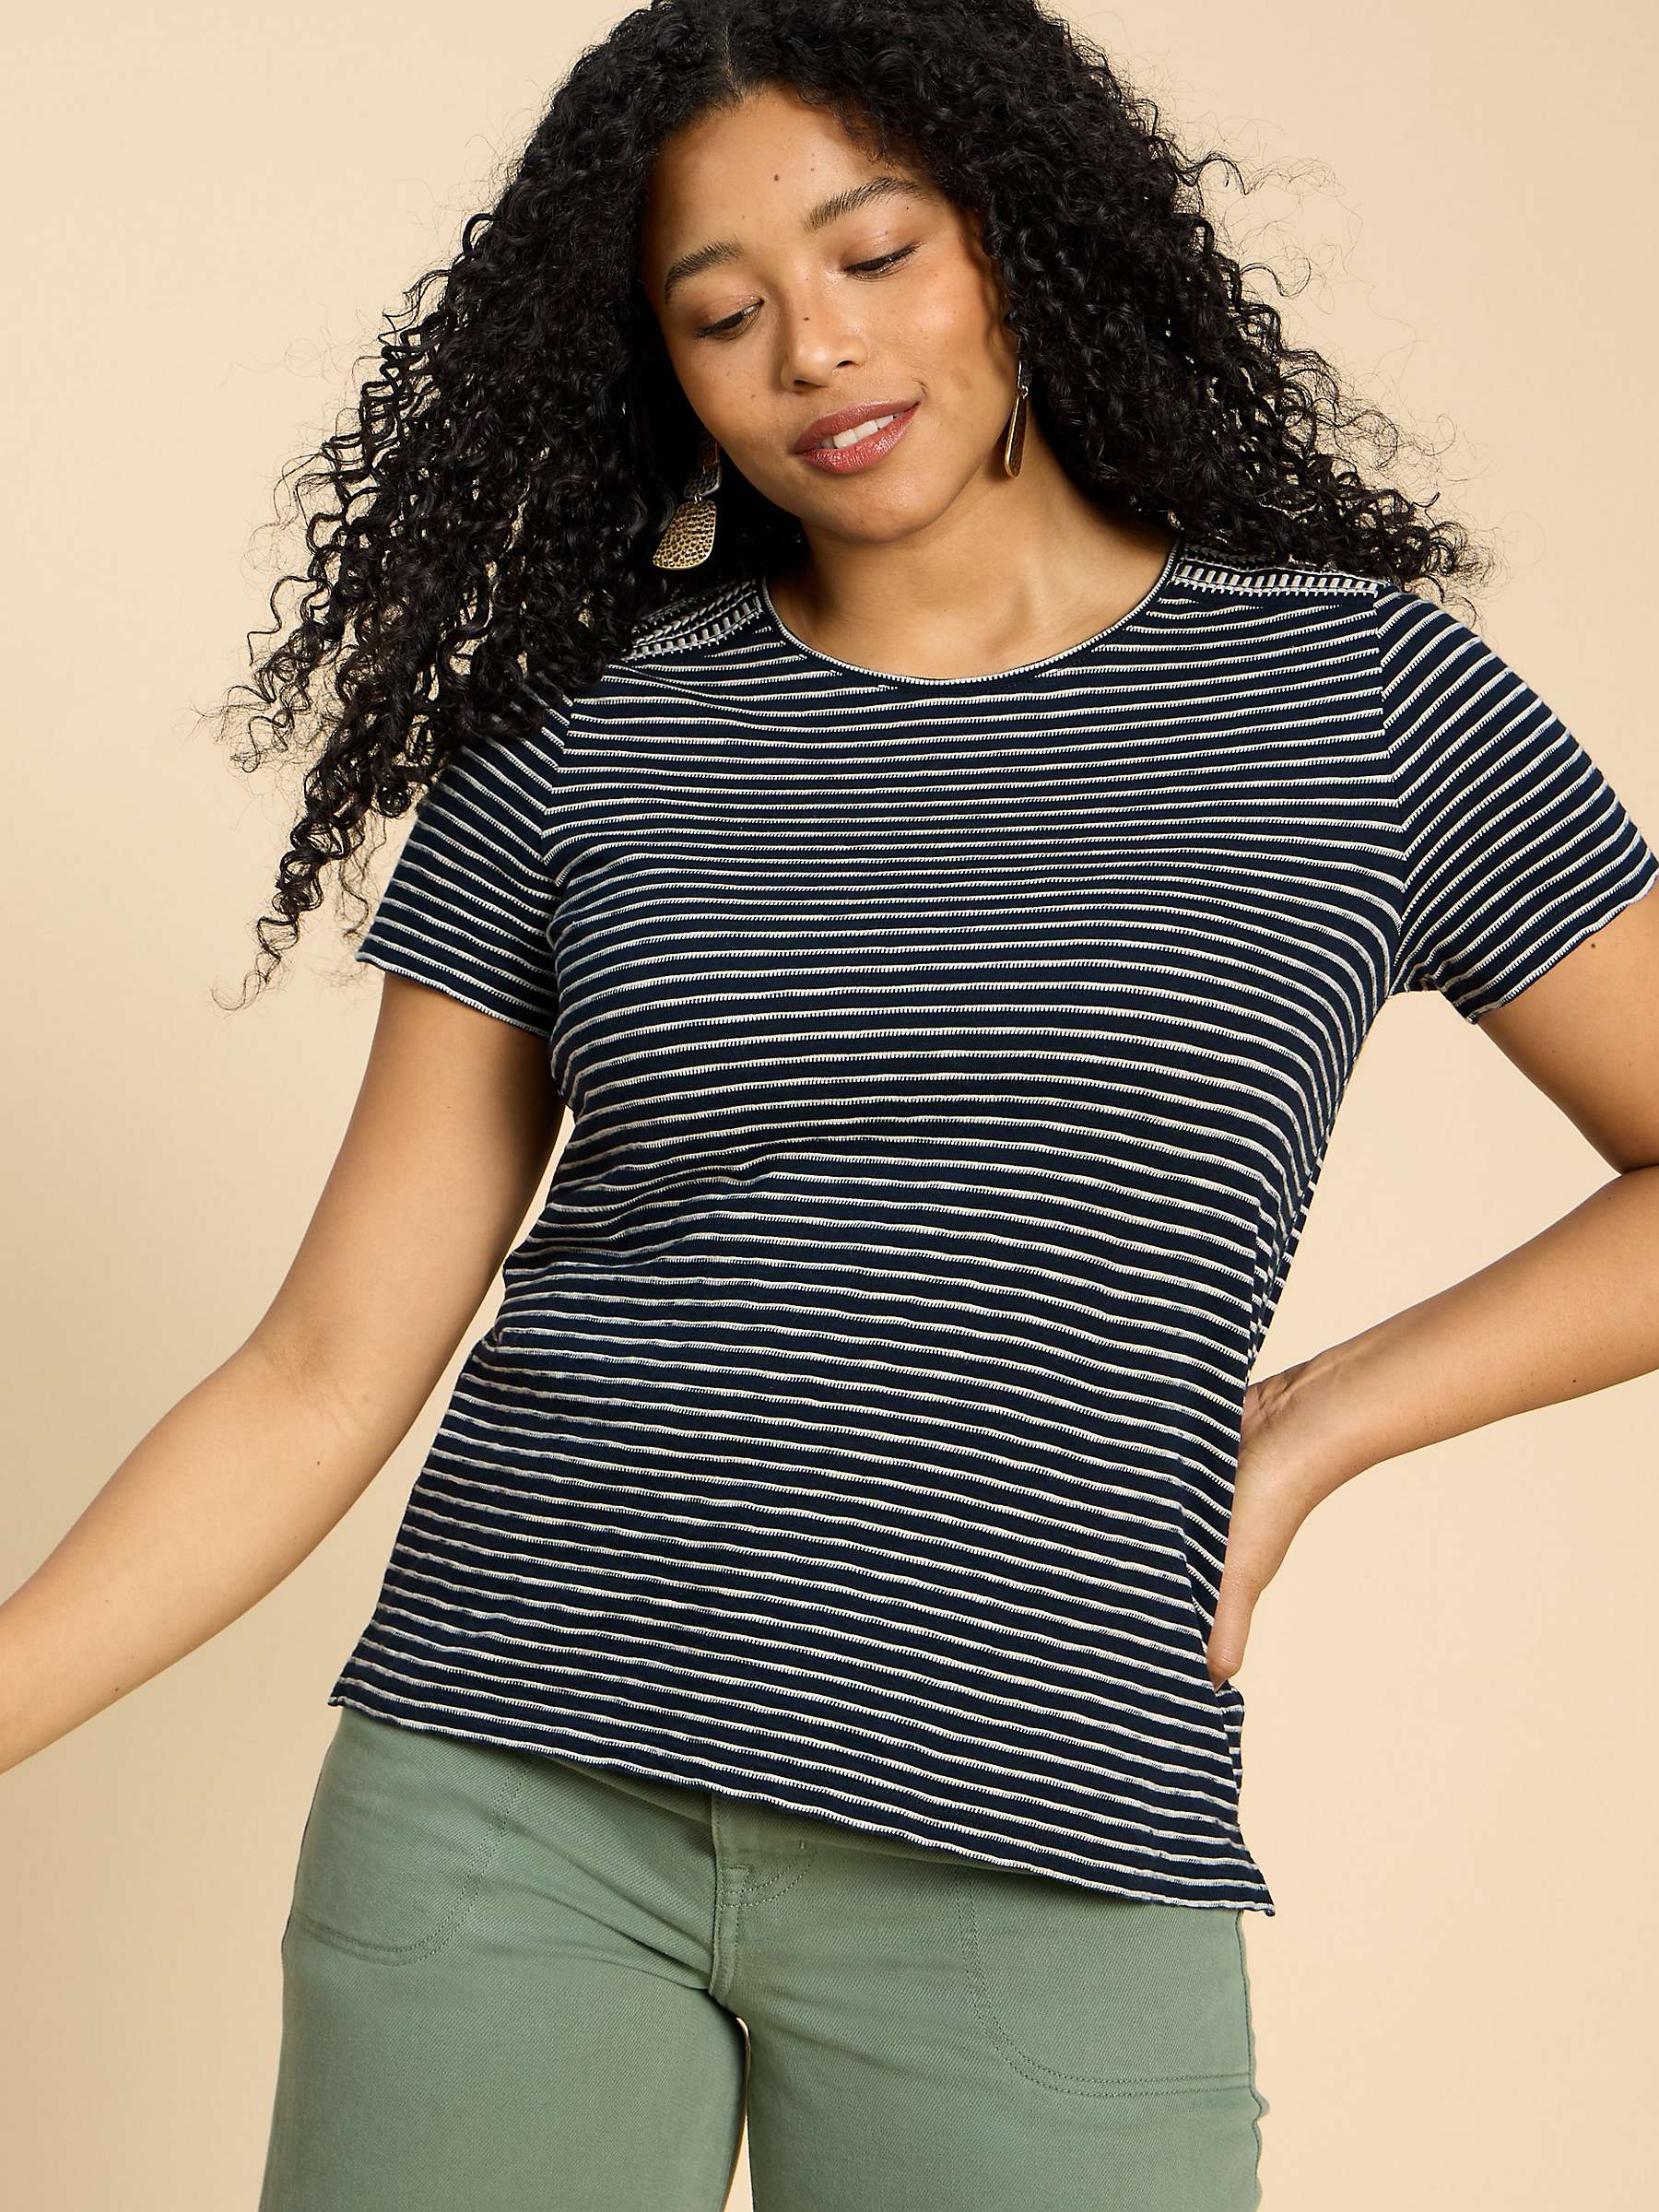 Buy White Stuff Abbie Embroidered Stripe Cotton T-Shirt, Ivory/Black Online at johnlewis.com